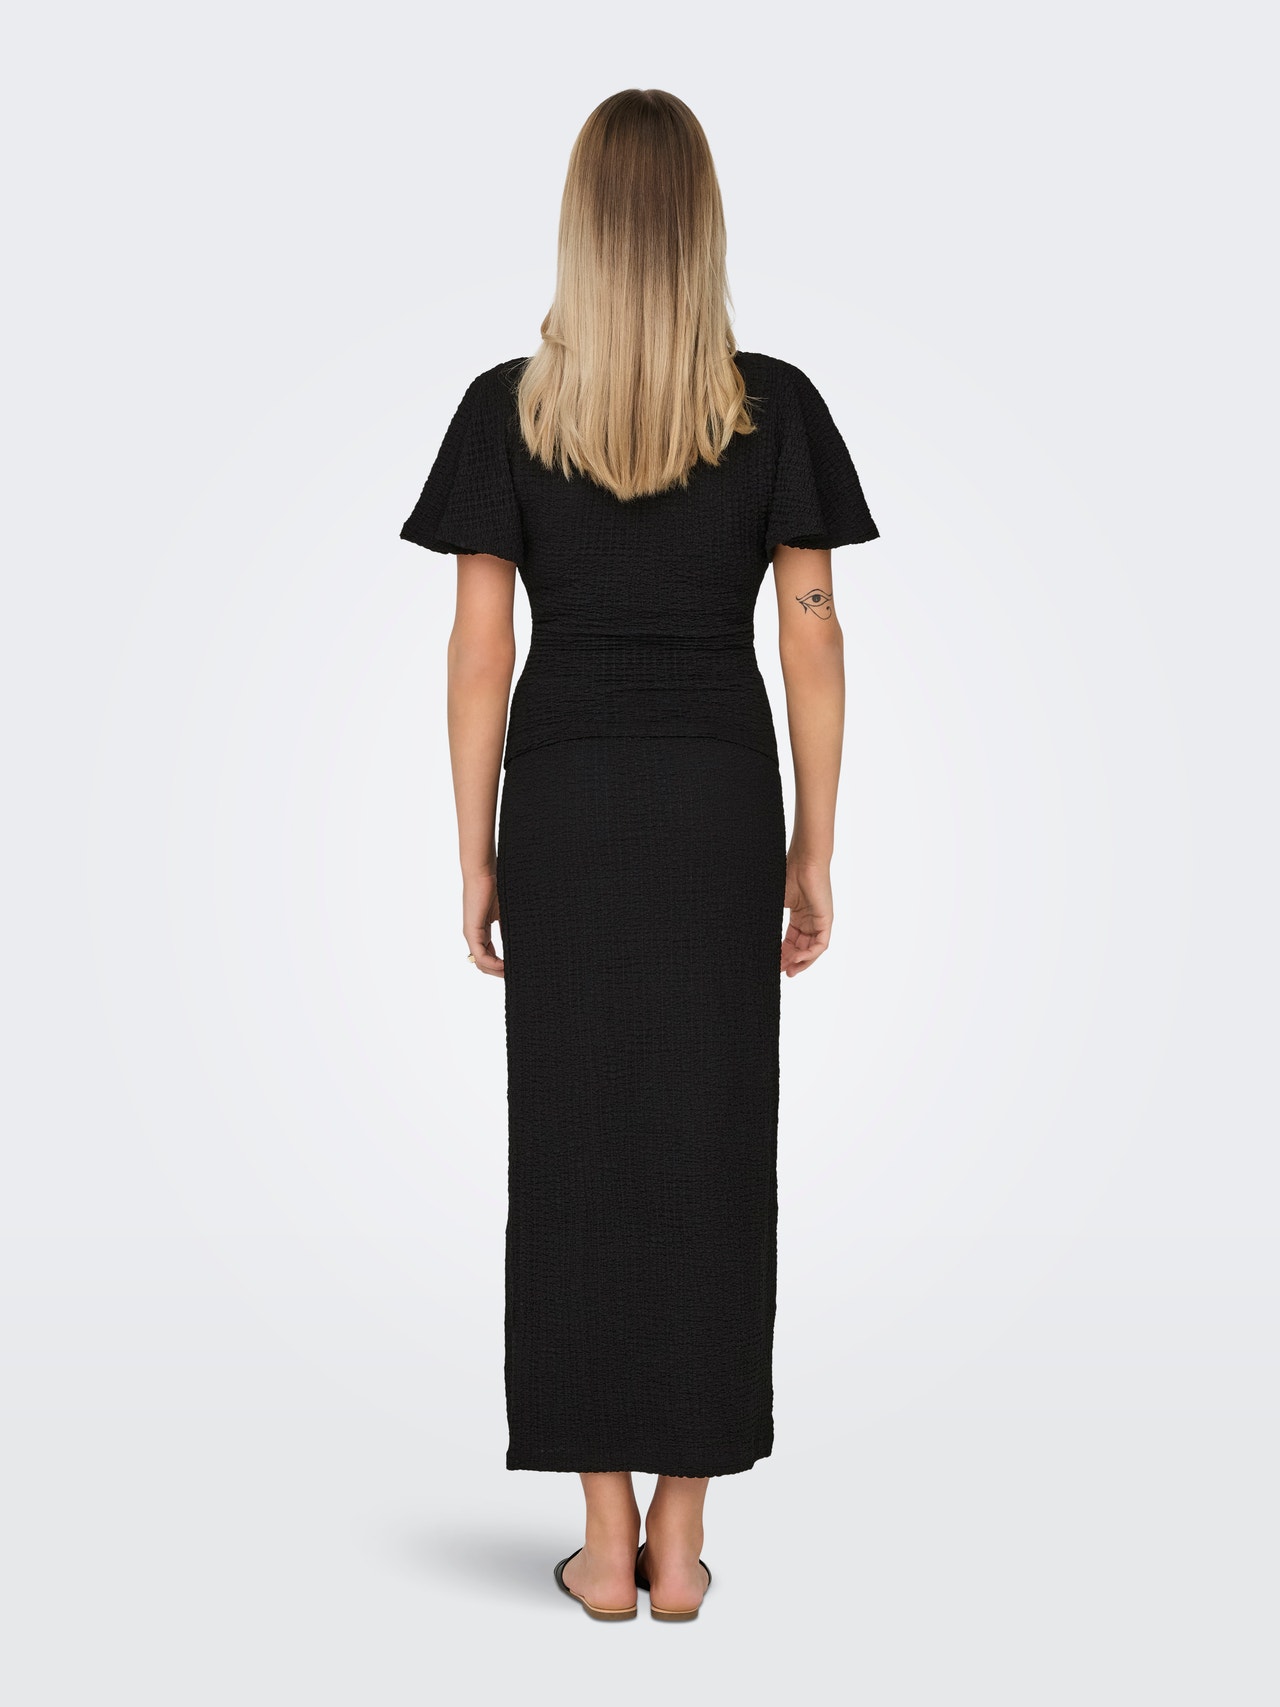 ONLY Maxi skirt with slits -Black - 15324480